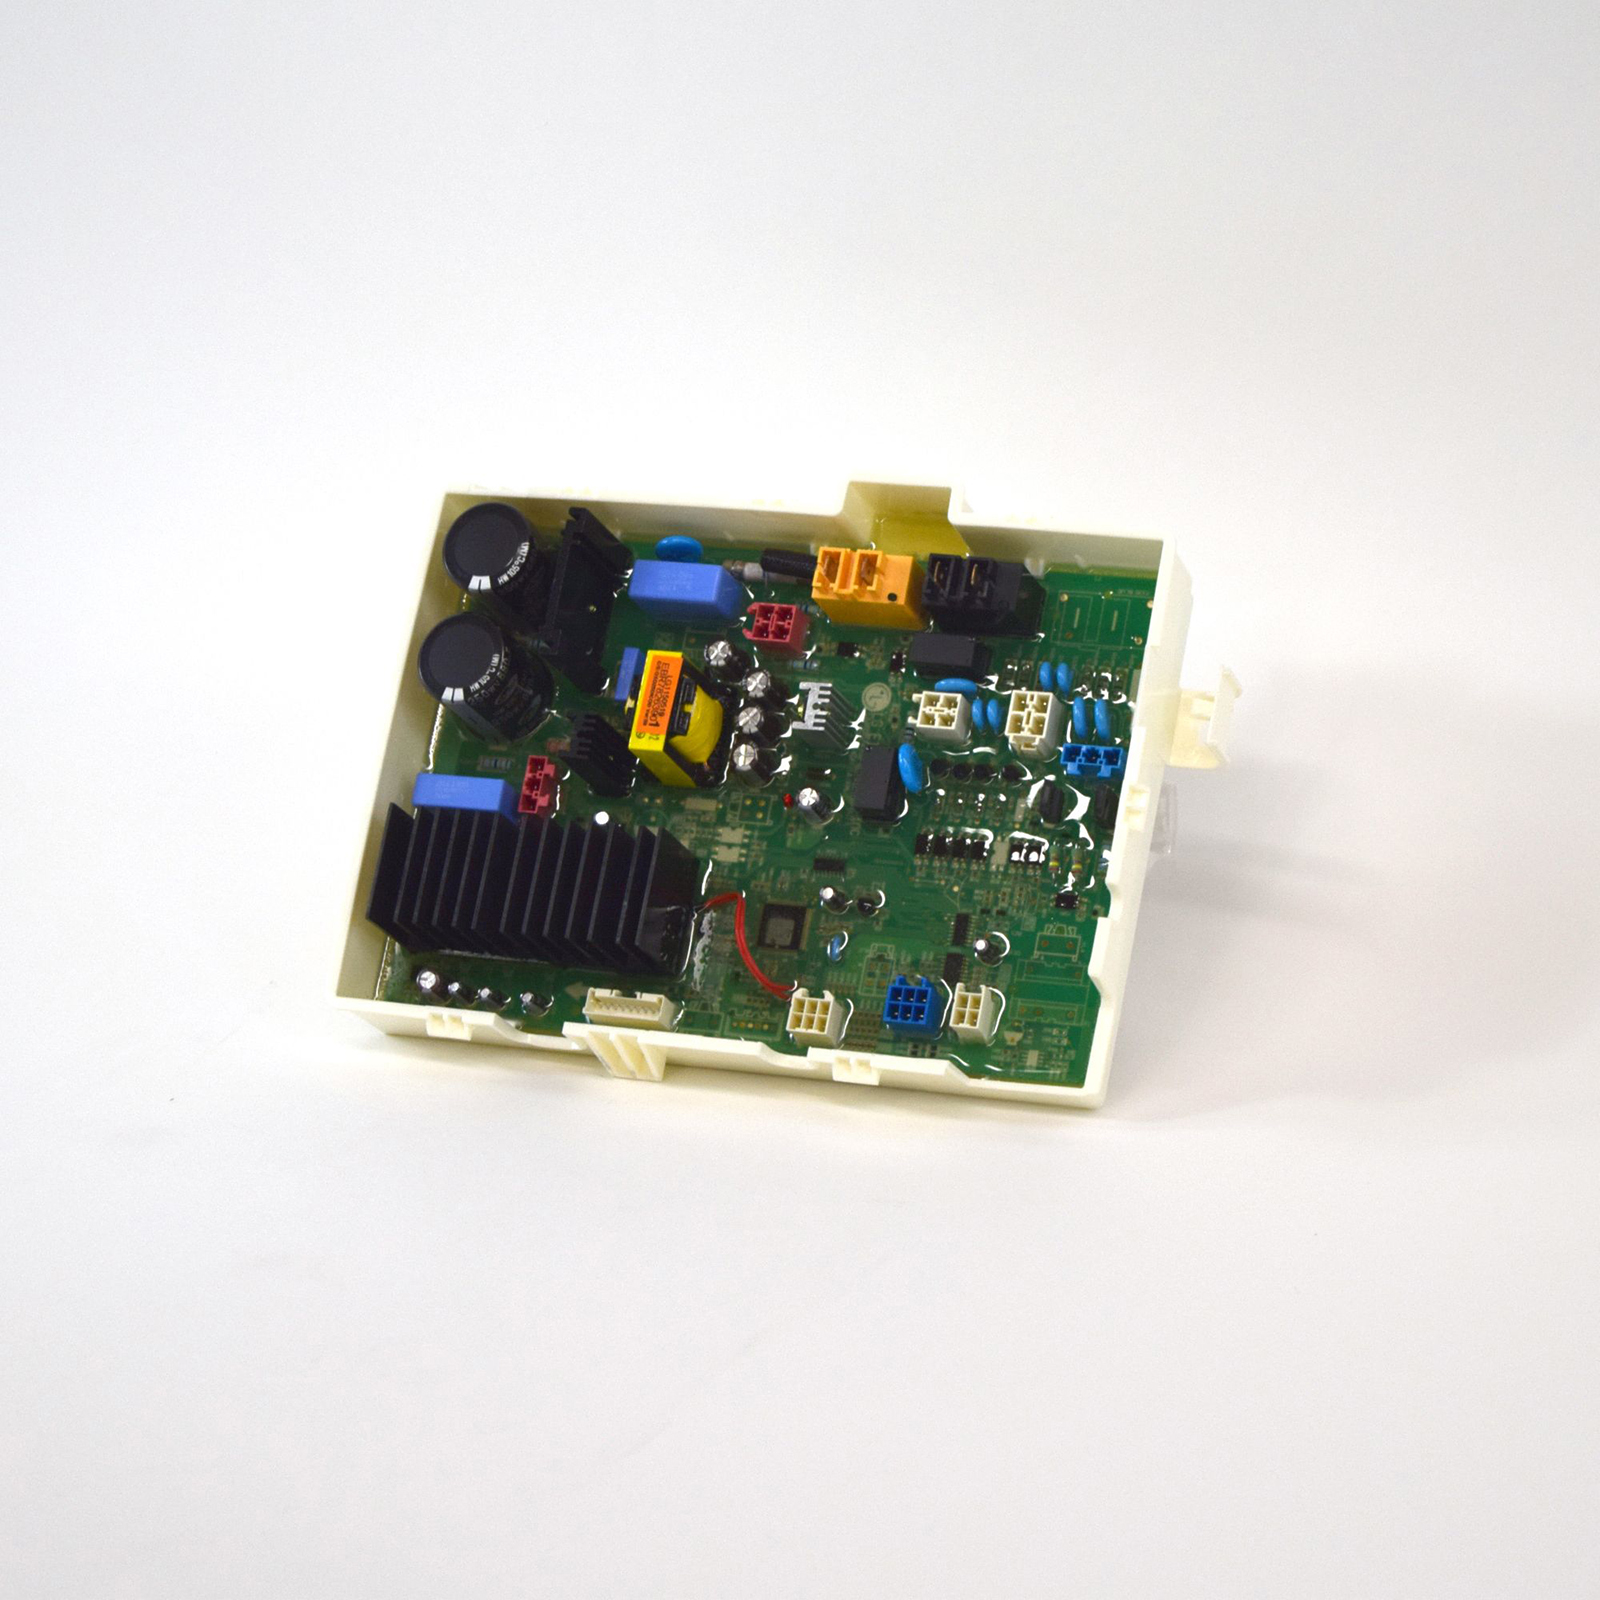 Details about   NEW* Genuine OEM LG Washer Display Control Board EBR85194711 *Same Day Shipping*